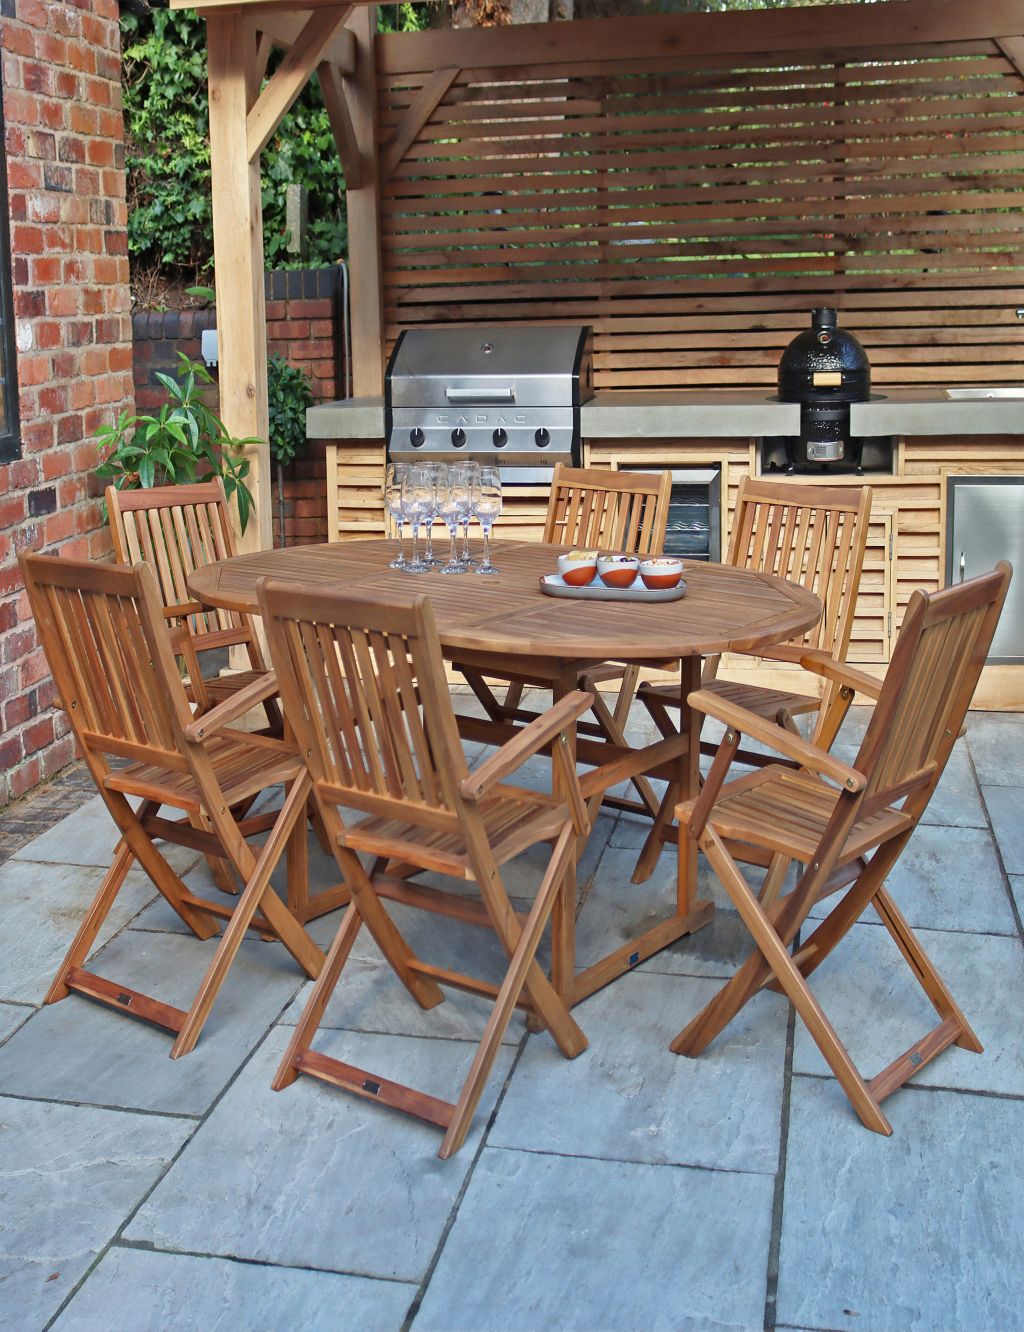 Turnbury 6 Seater Garden Table & Chairs